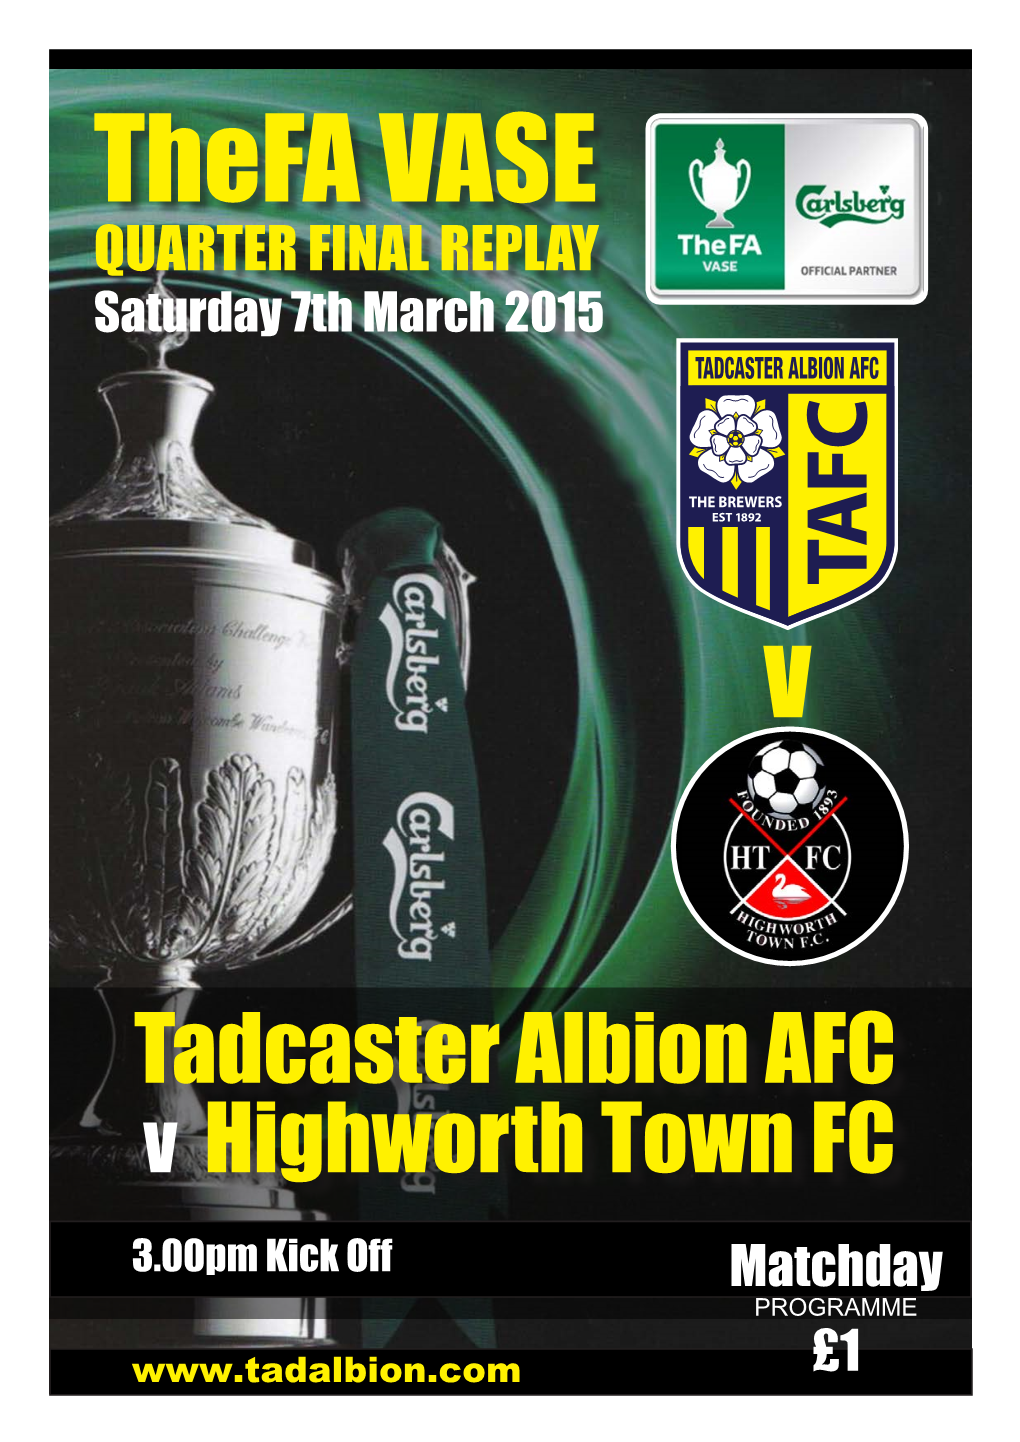 Thefa VASE QUARTER FINAL REPLAY Saturday 7Th March 2015